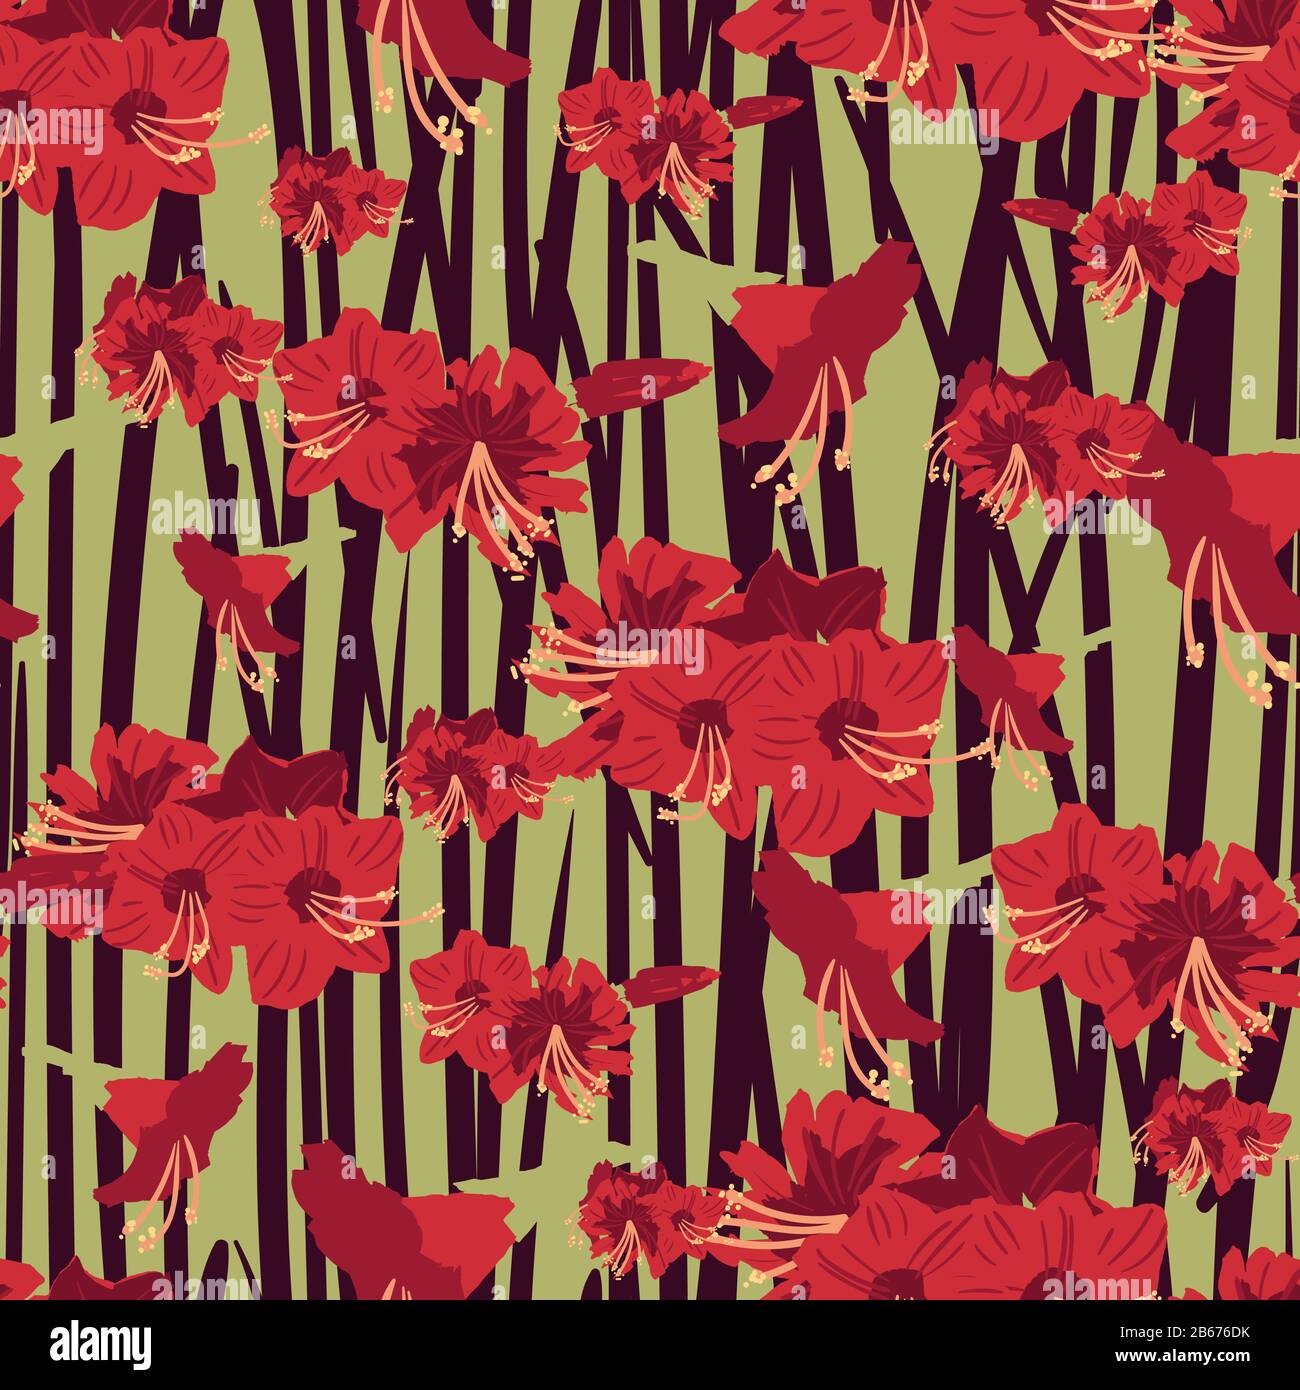 red amaryllis flowers seamless vector pattern Stock Vector